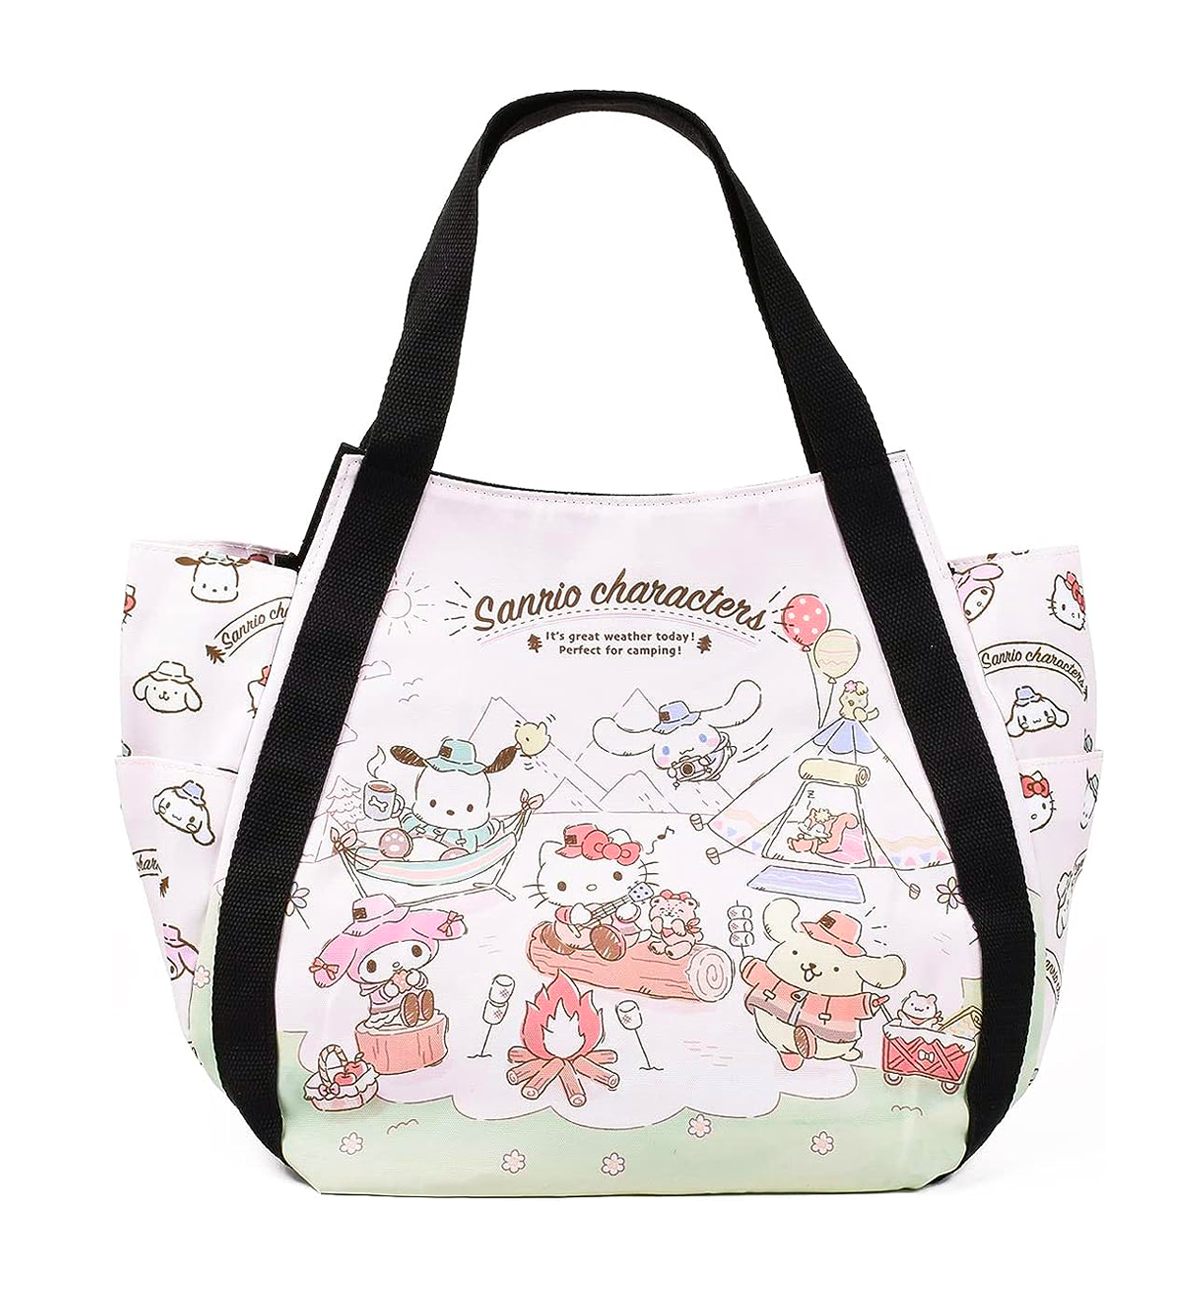 Sanrio Characters Camping Triangle Tote Bag [Limited Edition]